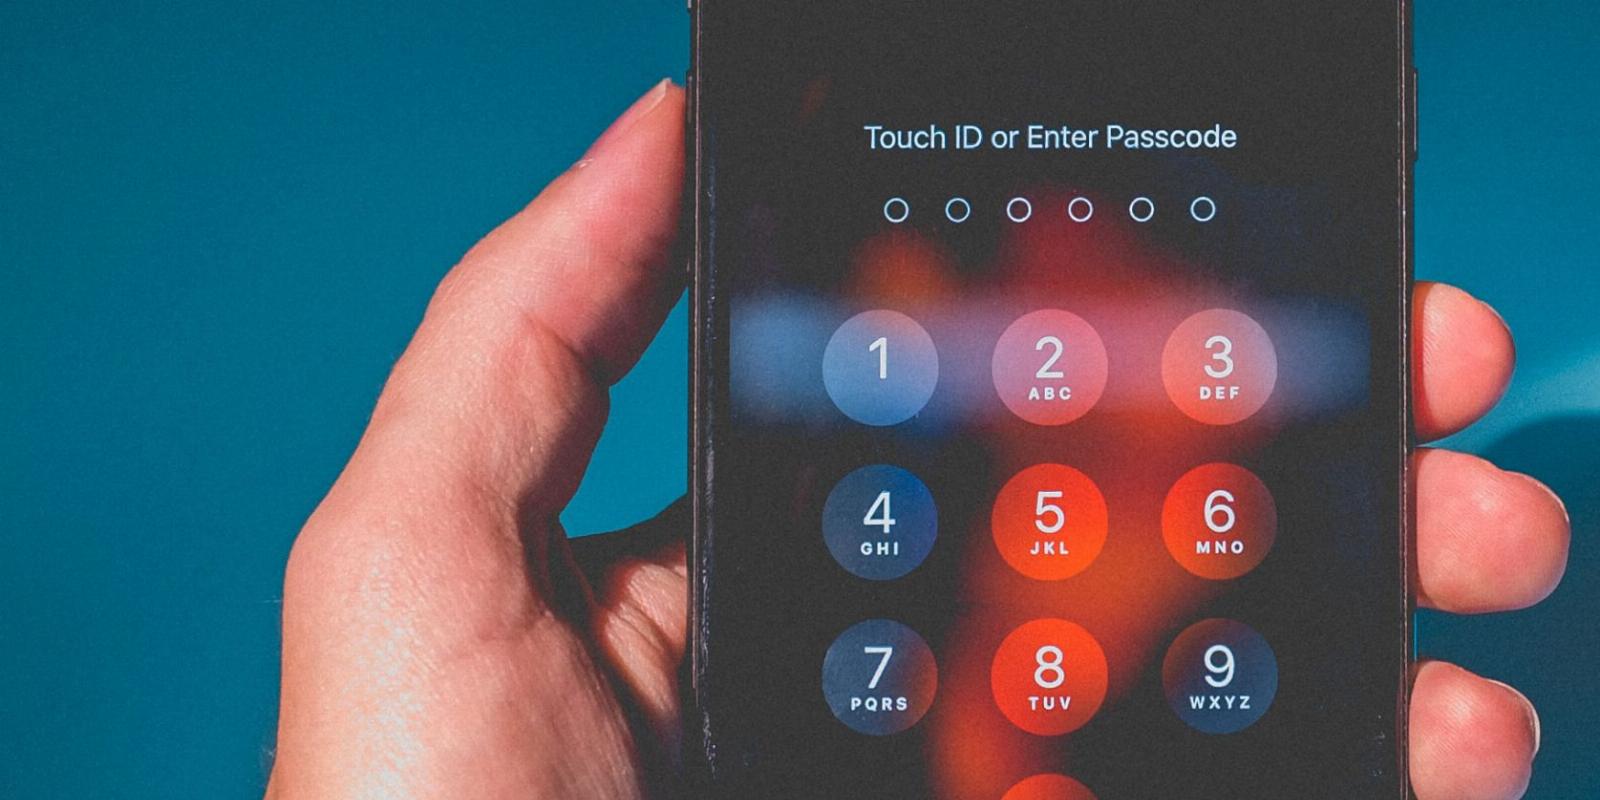 Should You Be Worried About Thieves Stealing Your iPhone Passcode?